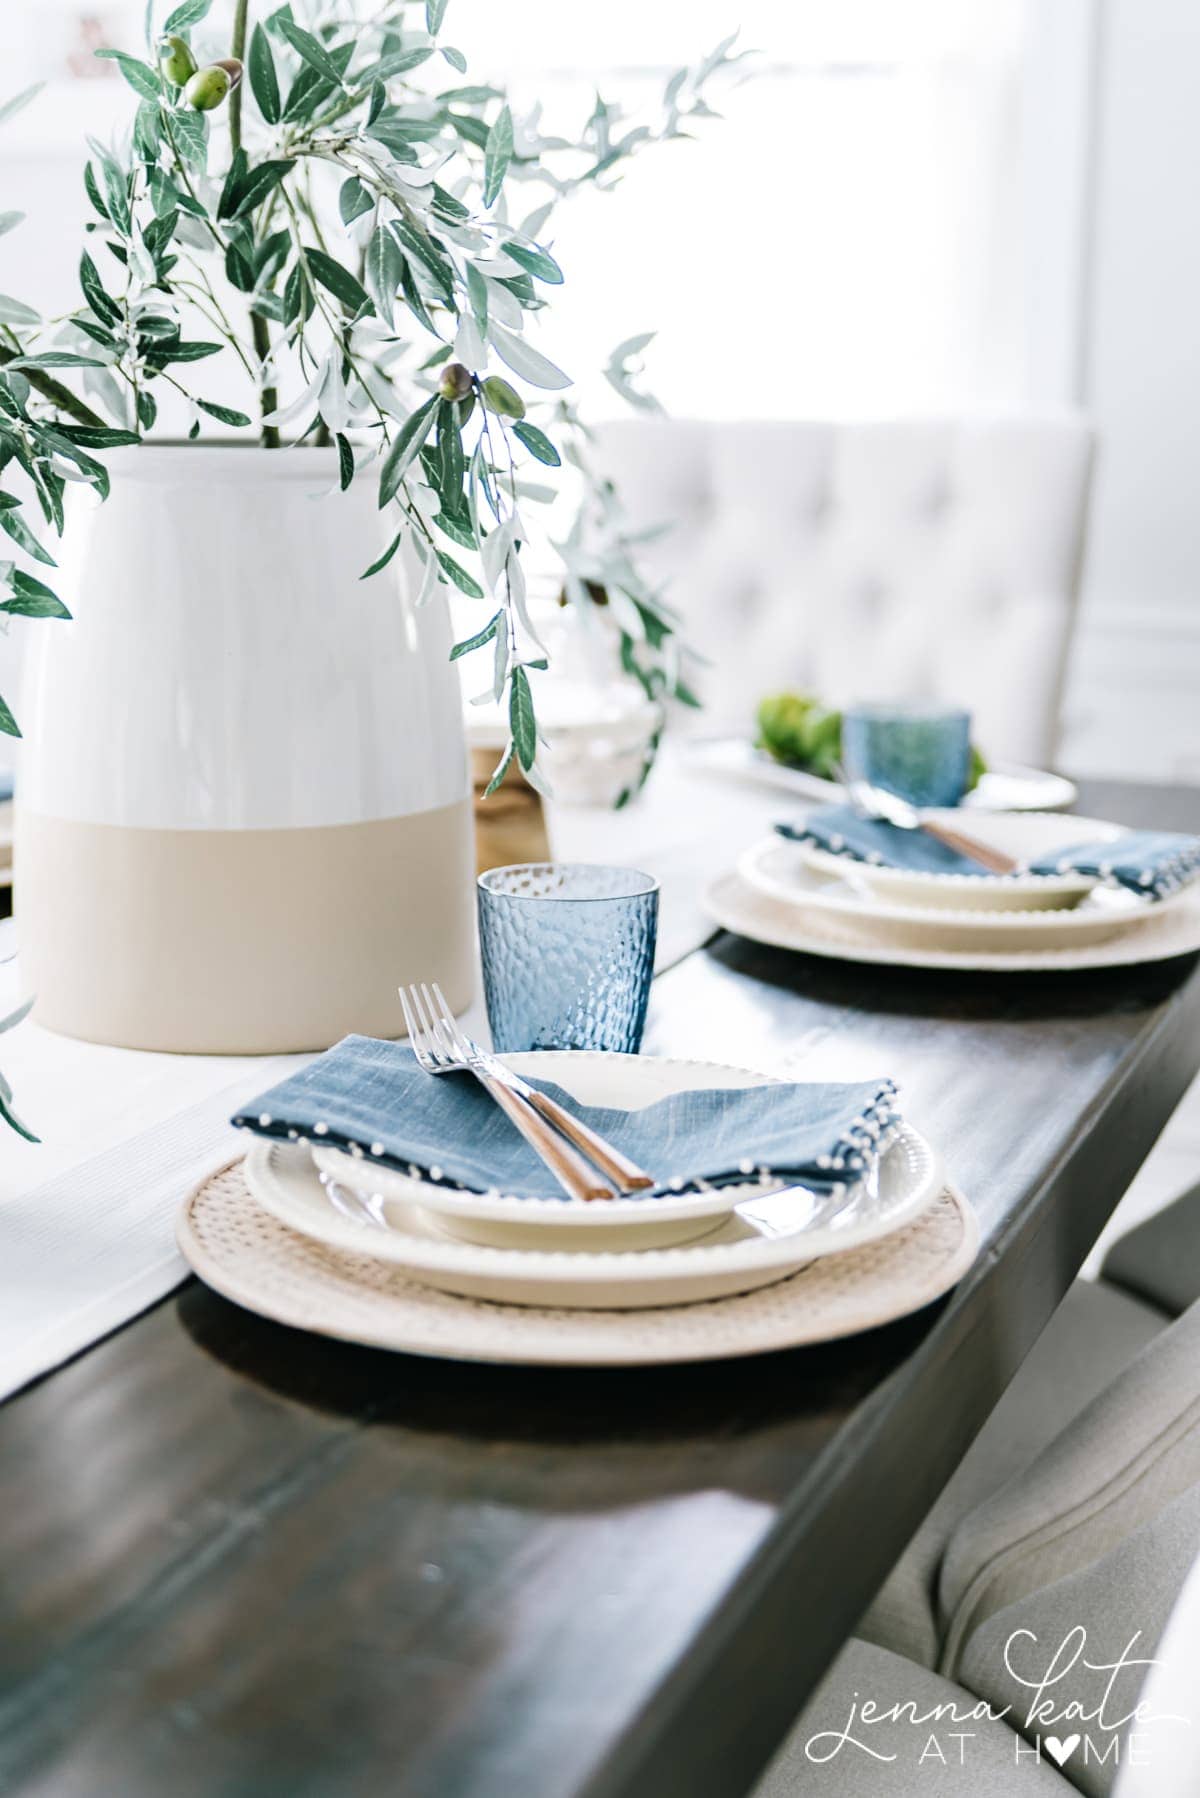 I love the light coastal blue color of these linen napkins and glassware. They add the perfect pops of color